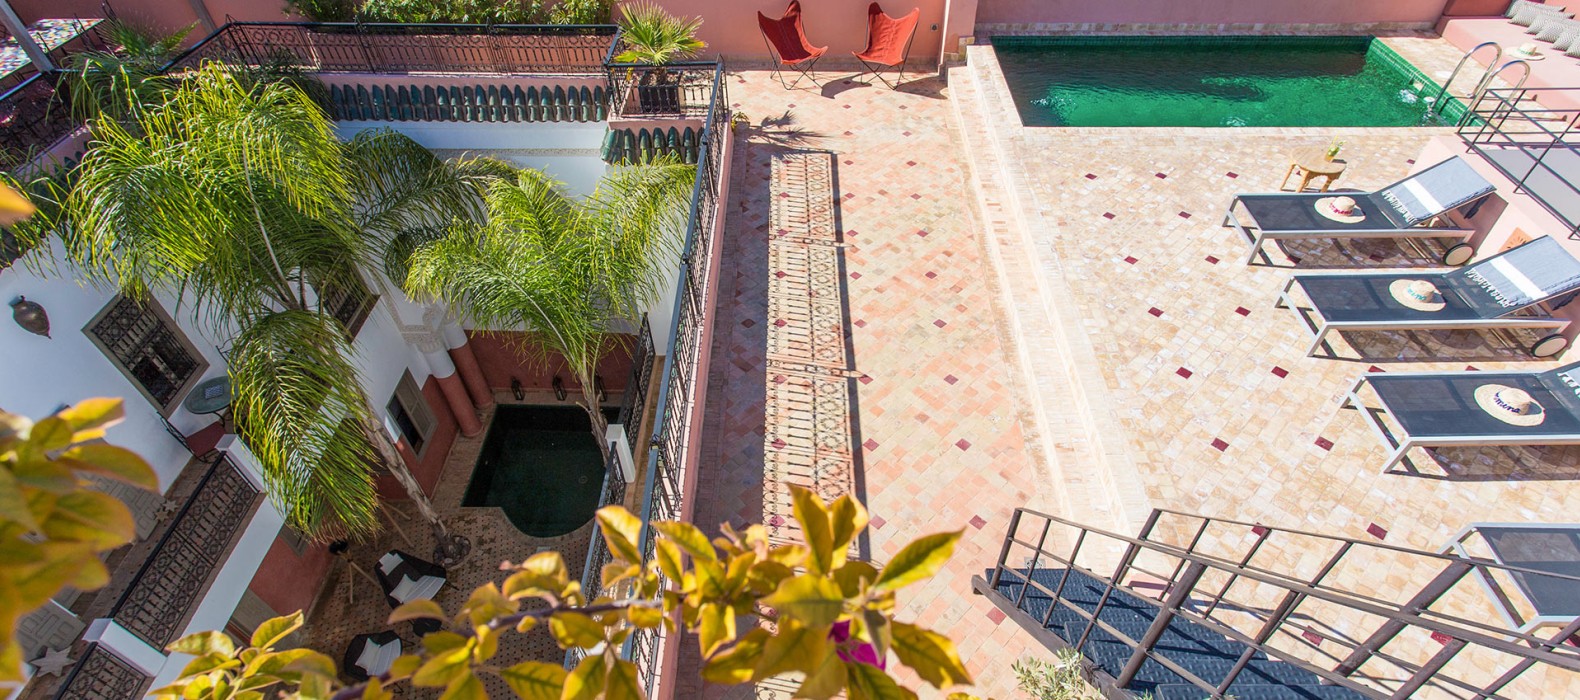 Rooftop view of Riad Mima in Marrakech